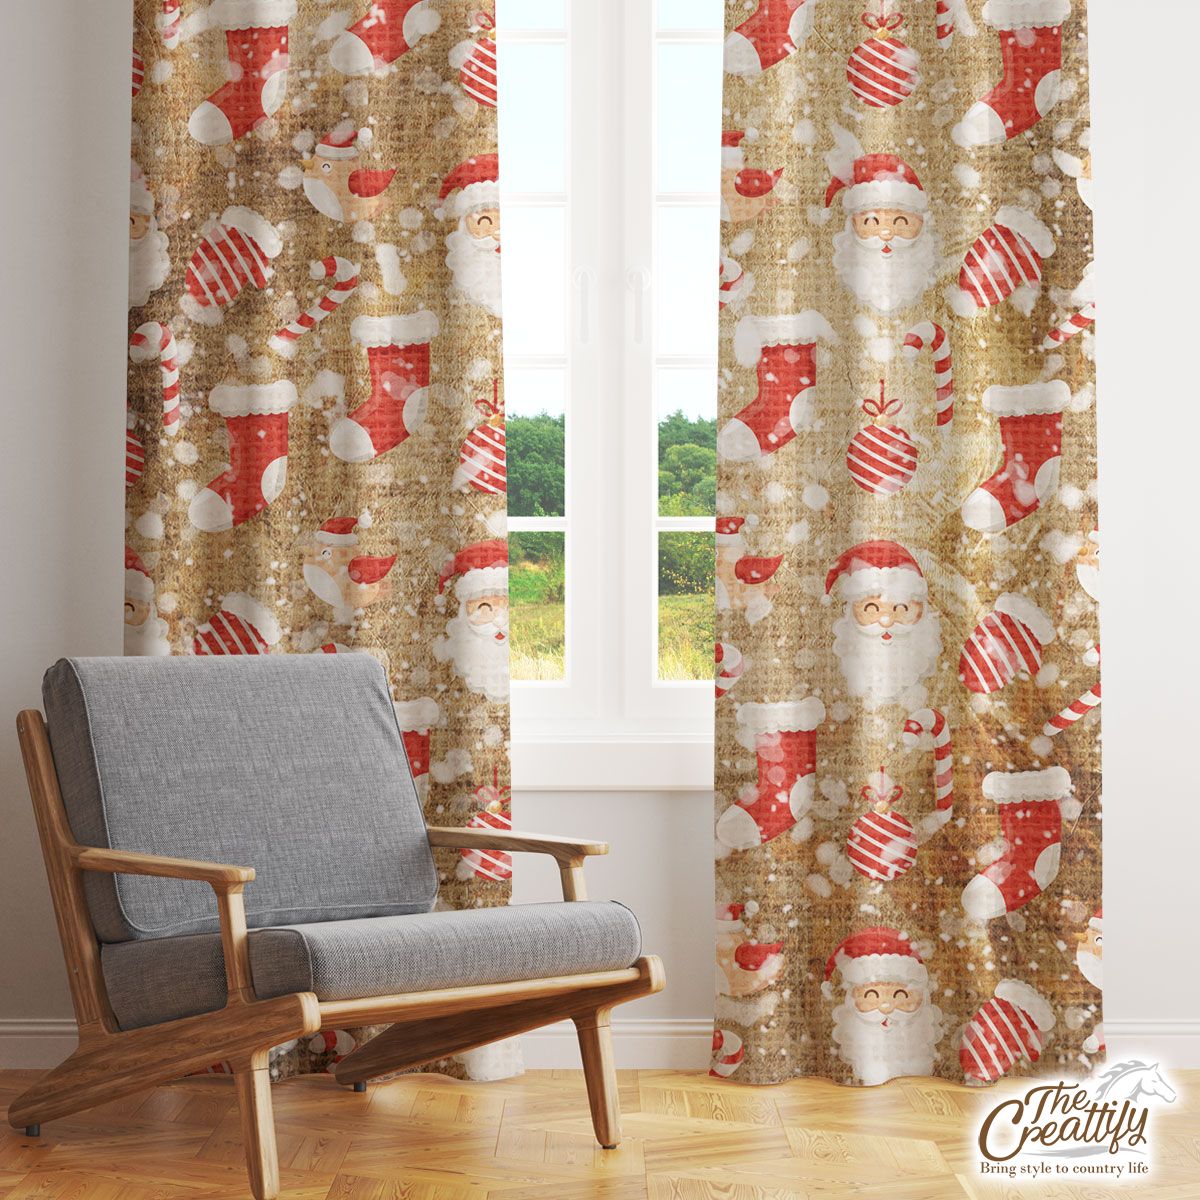 Santa Clause, Red Socks, Candy Canes And Cardinal Bird On Snowflake Window Curtain